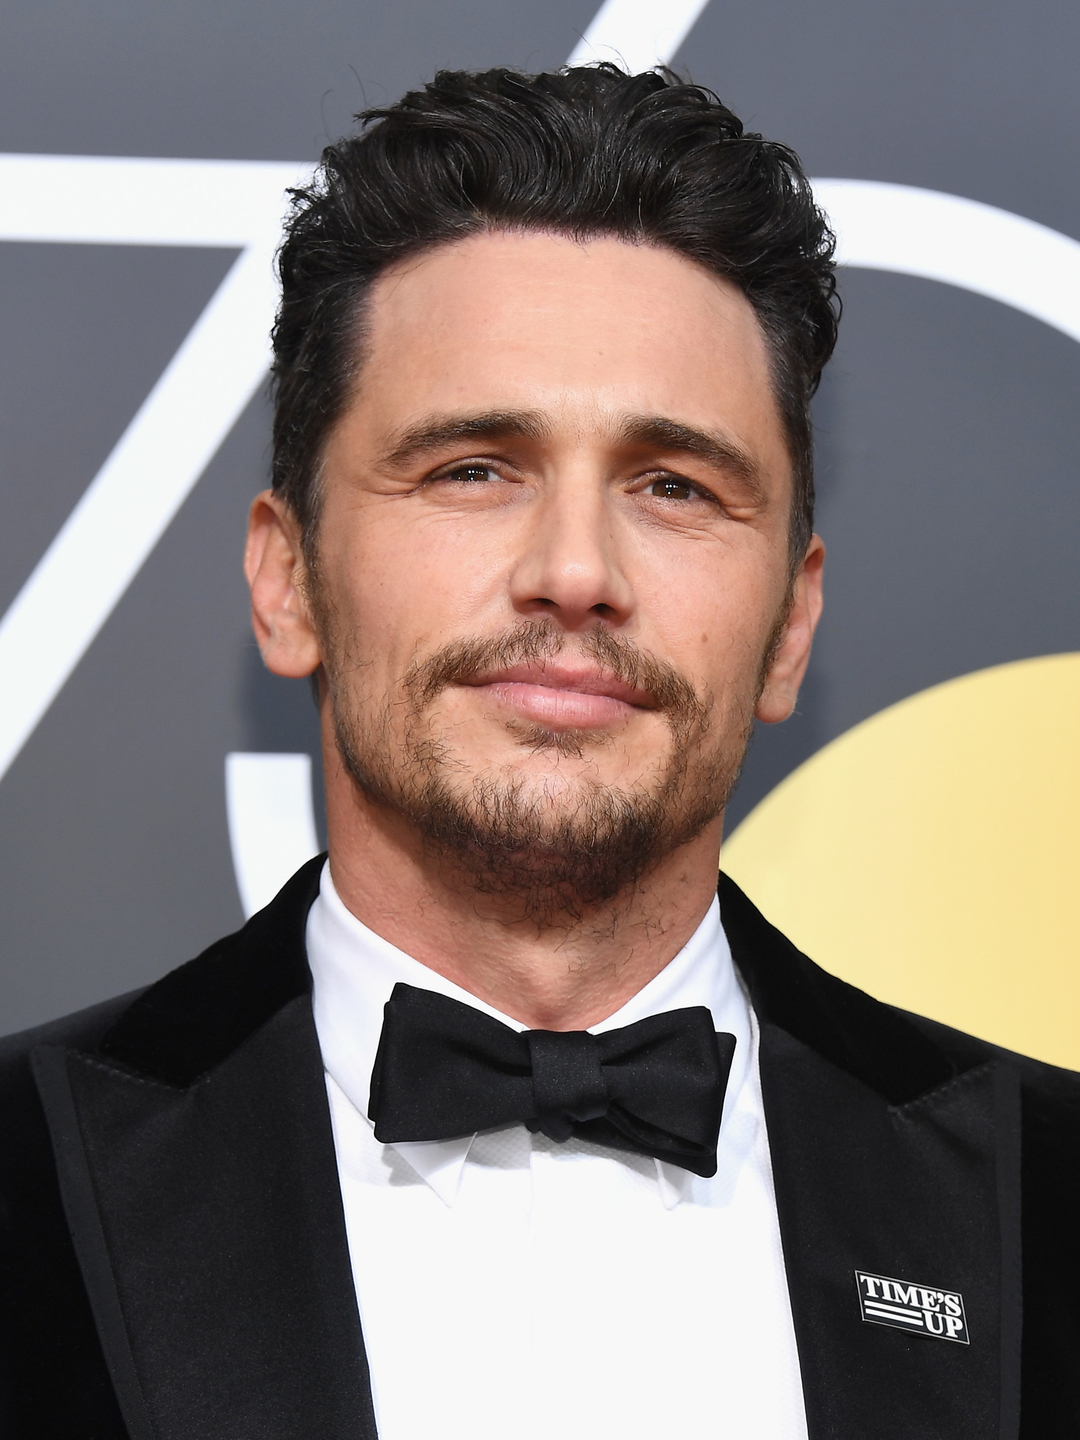 James Franco who are his parents